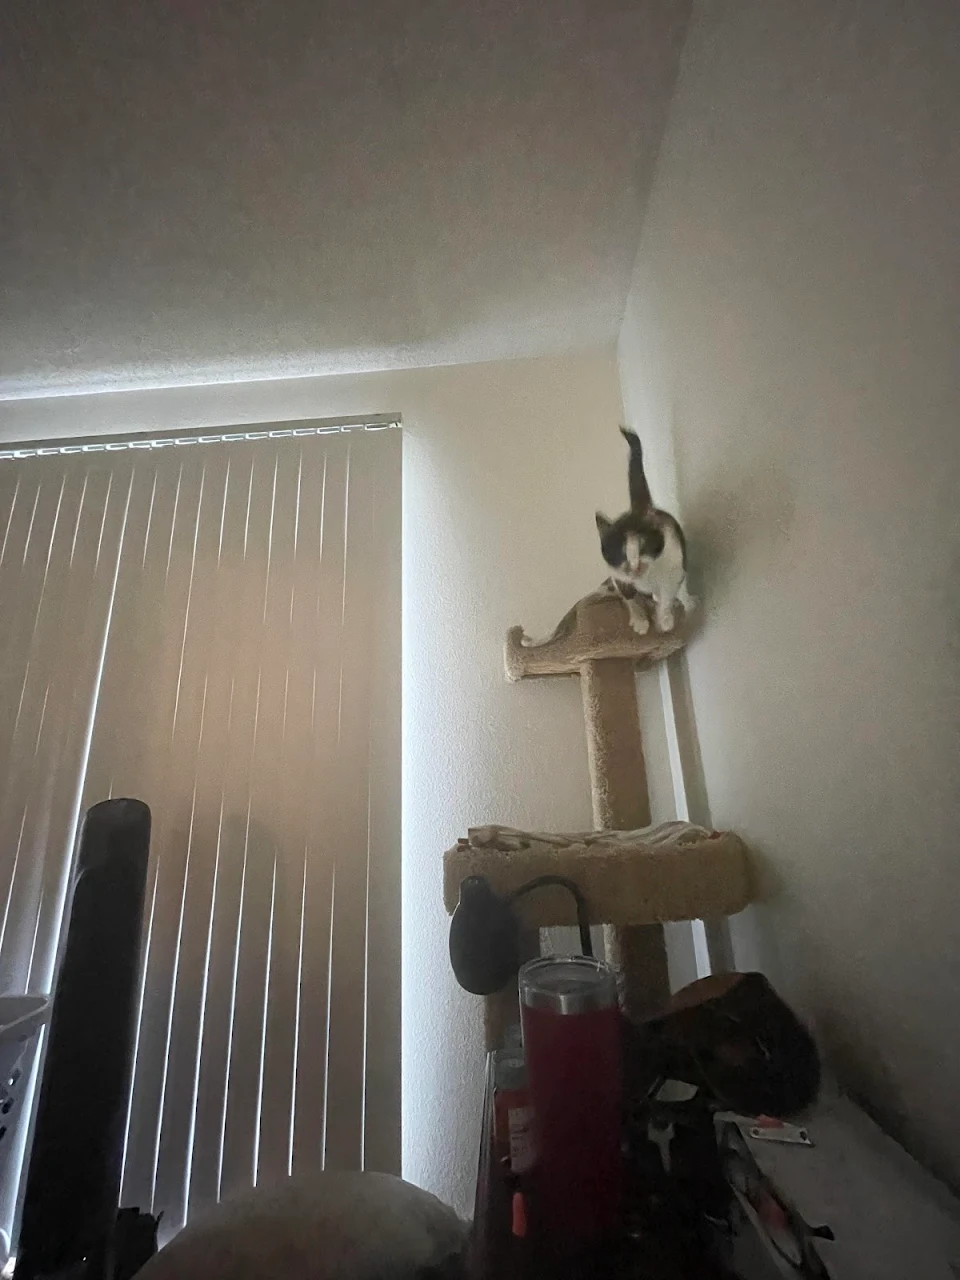 Every night our cat jumps on my side from her cat tree while I’m sleeping. How do I stop her?